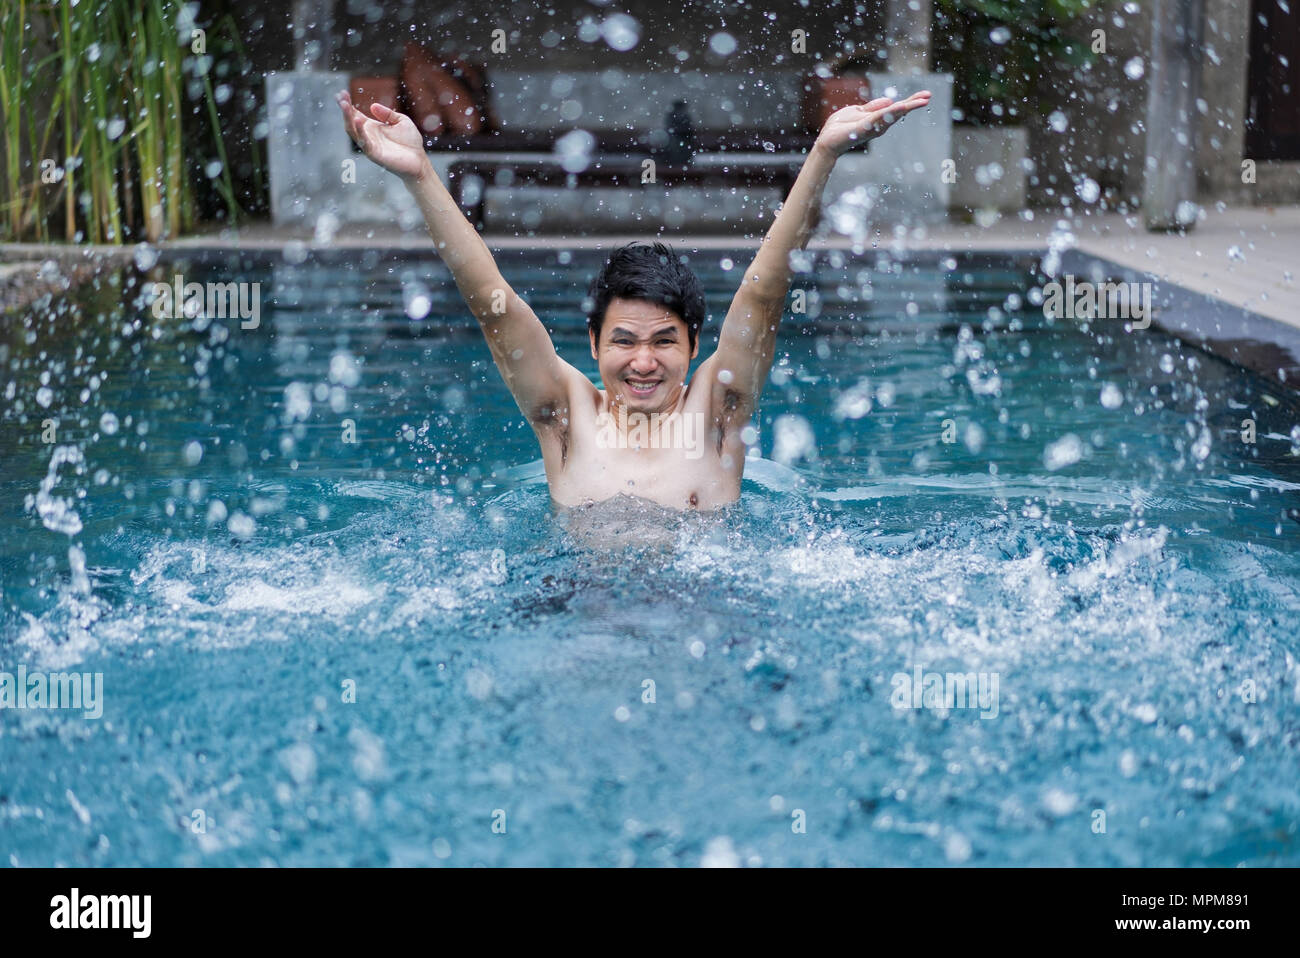 young man in swimming pool and playing water splash Stock Photo